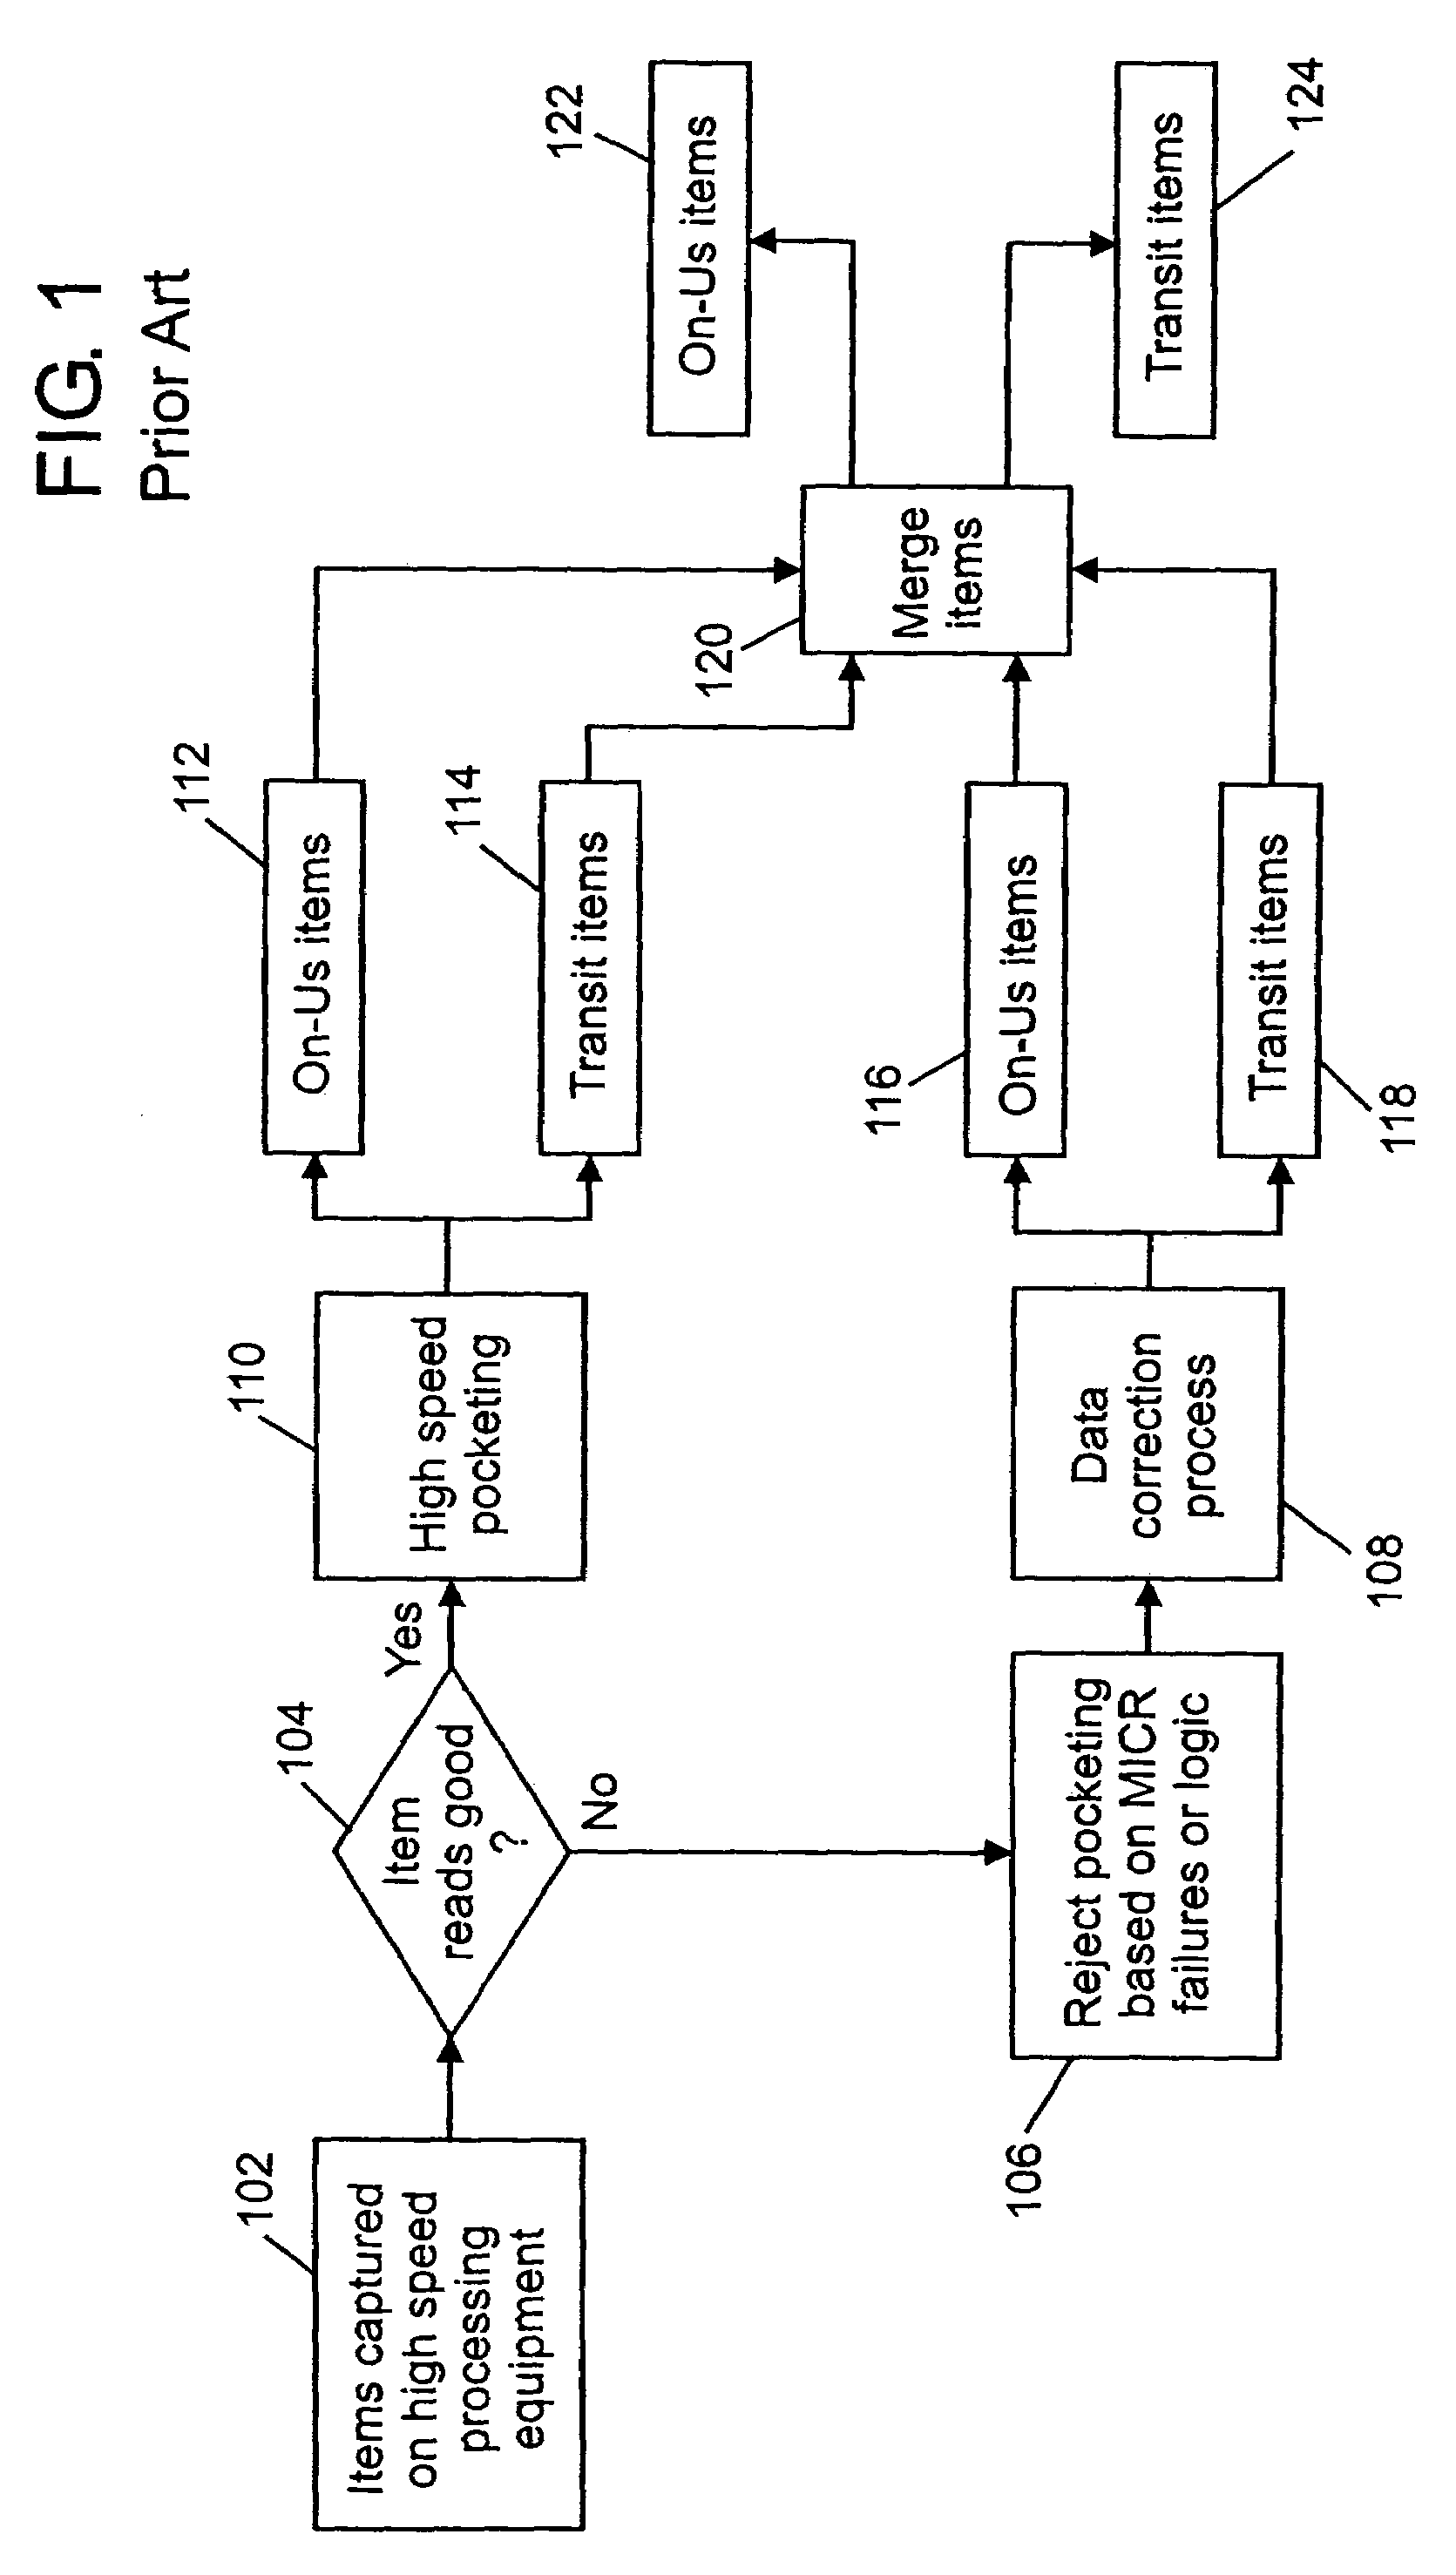 System and method for the processing of MICR documents that produce read errors